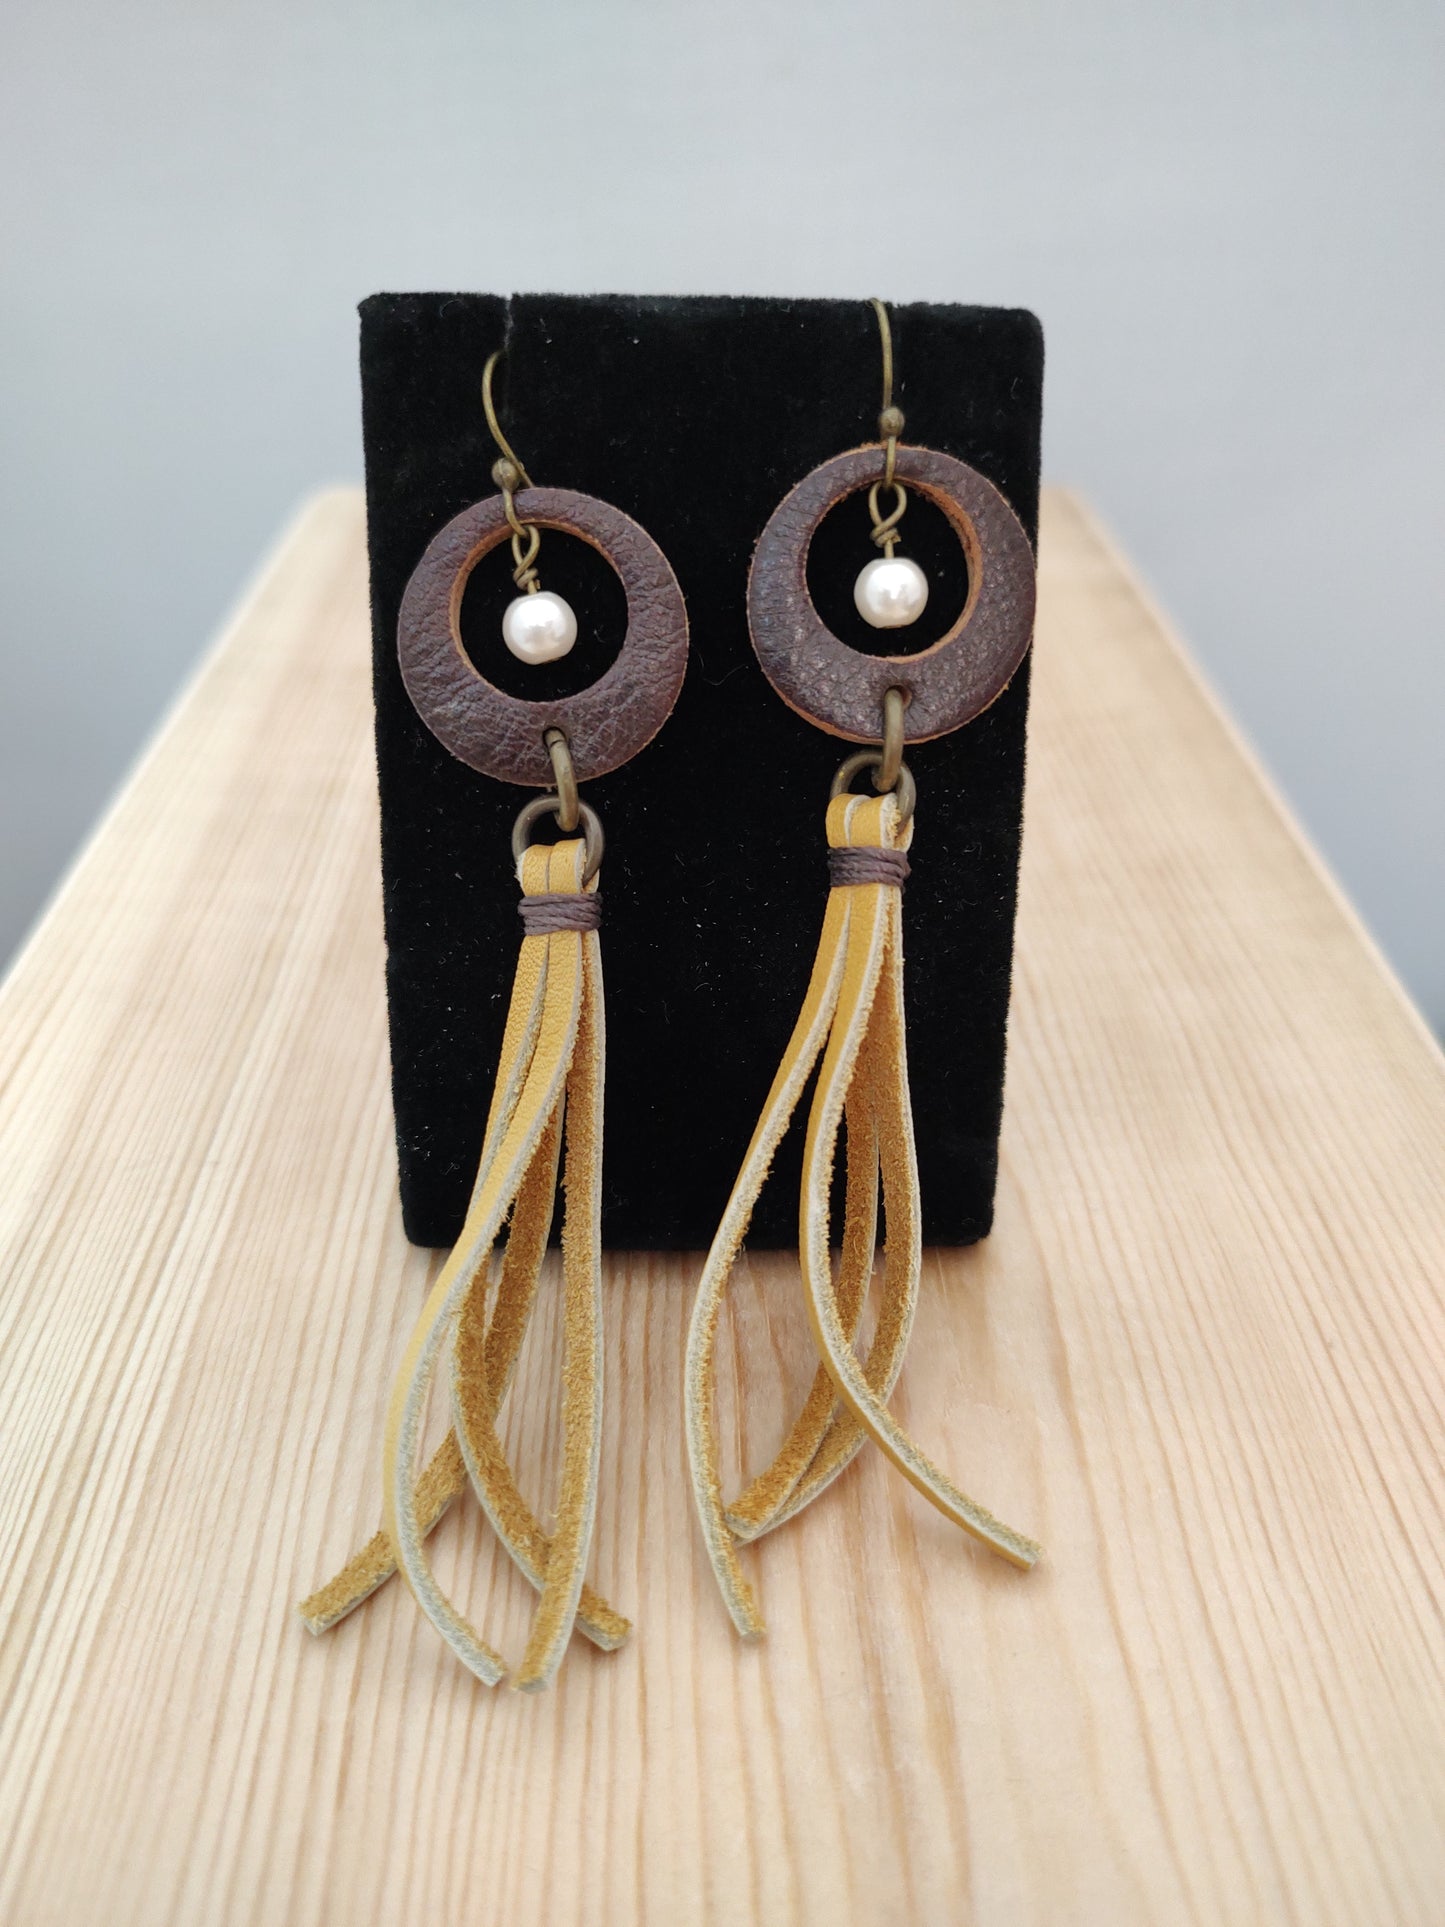 Leather and Hook Dangle with Simulated Pearl Beads Earrings